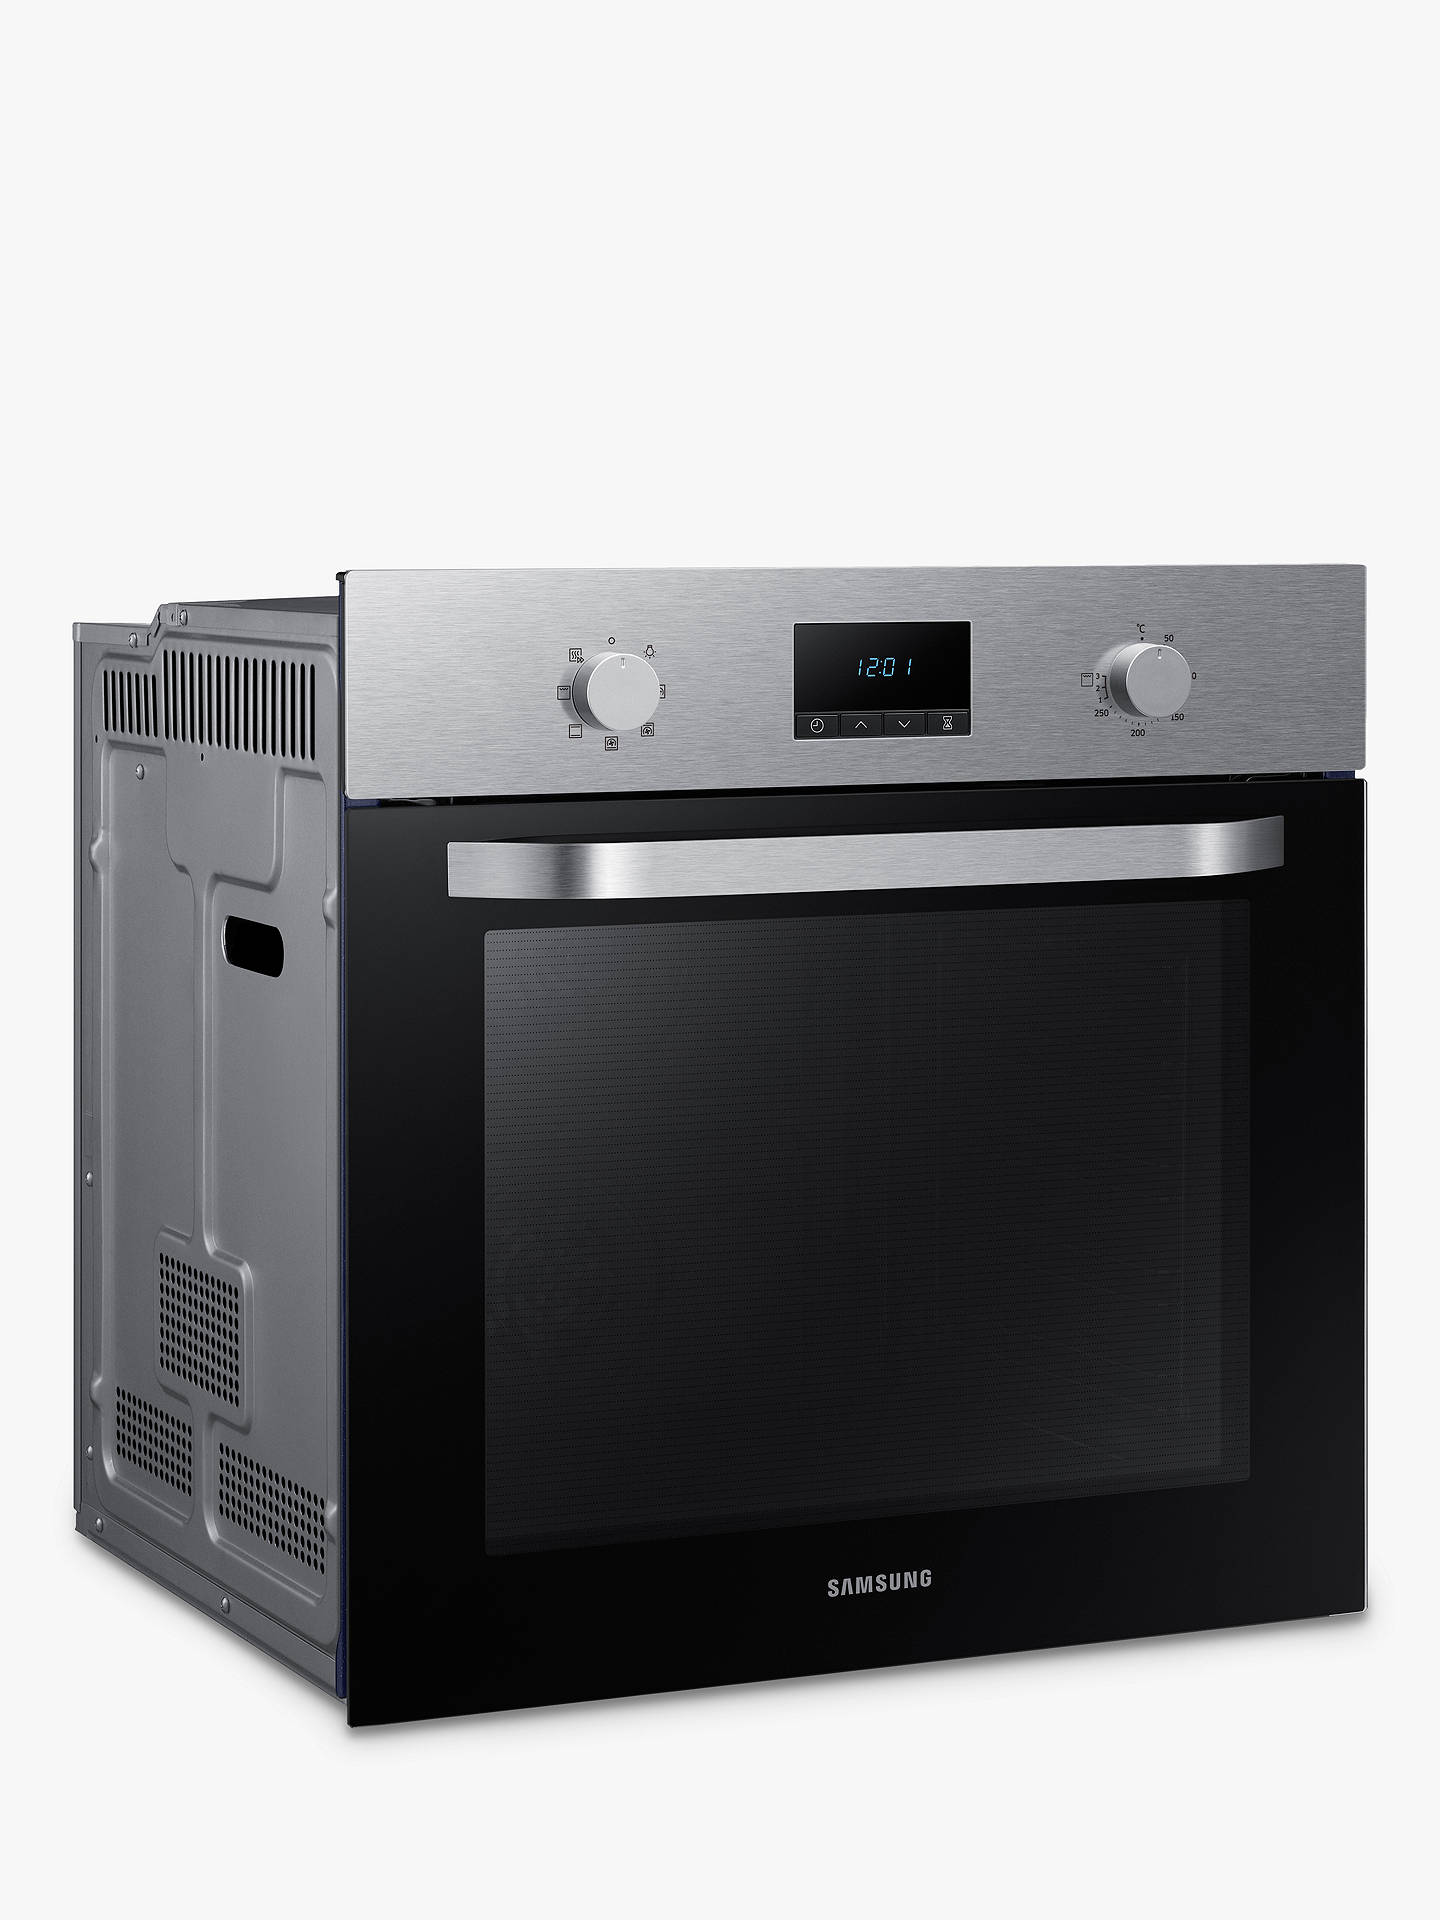 Samsung integrated oven